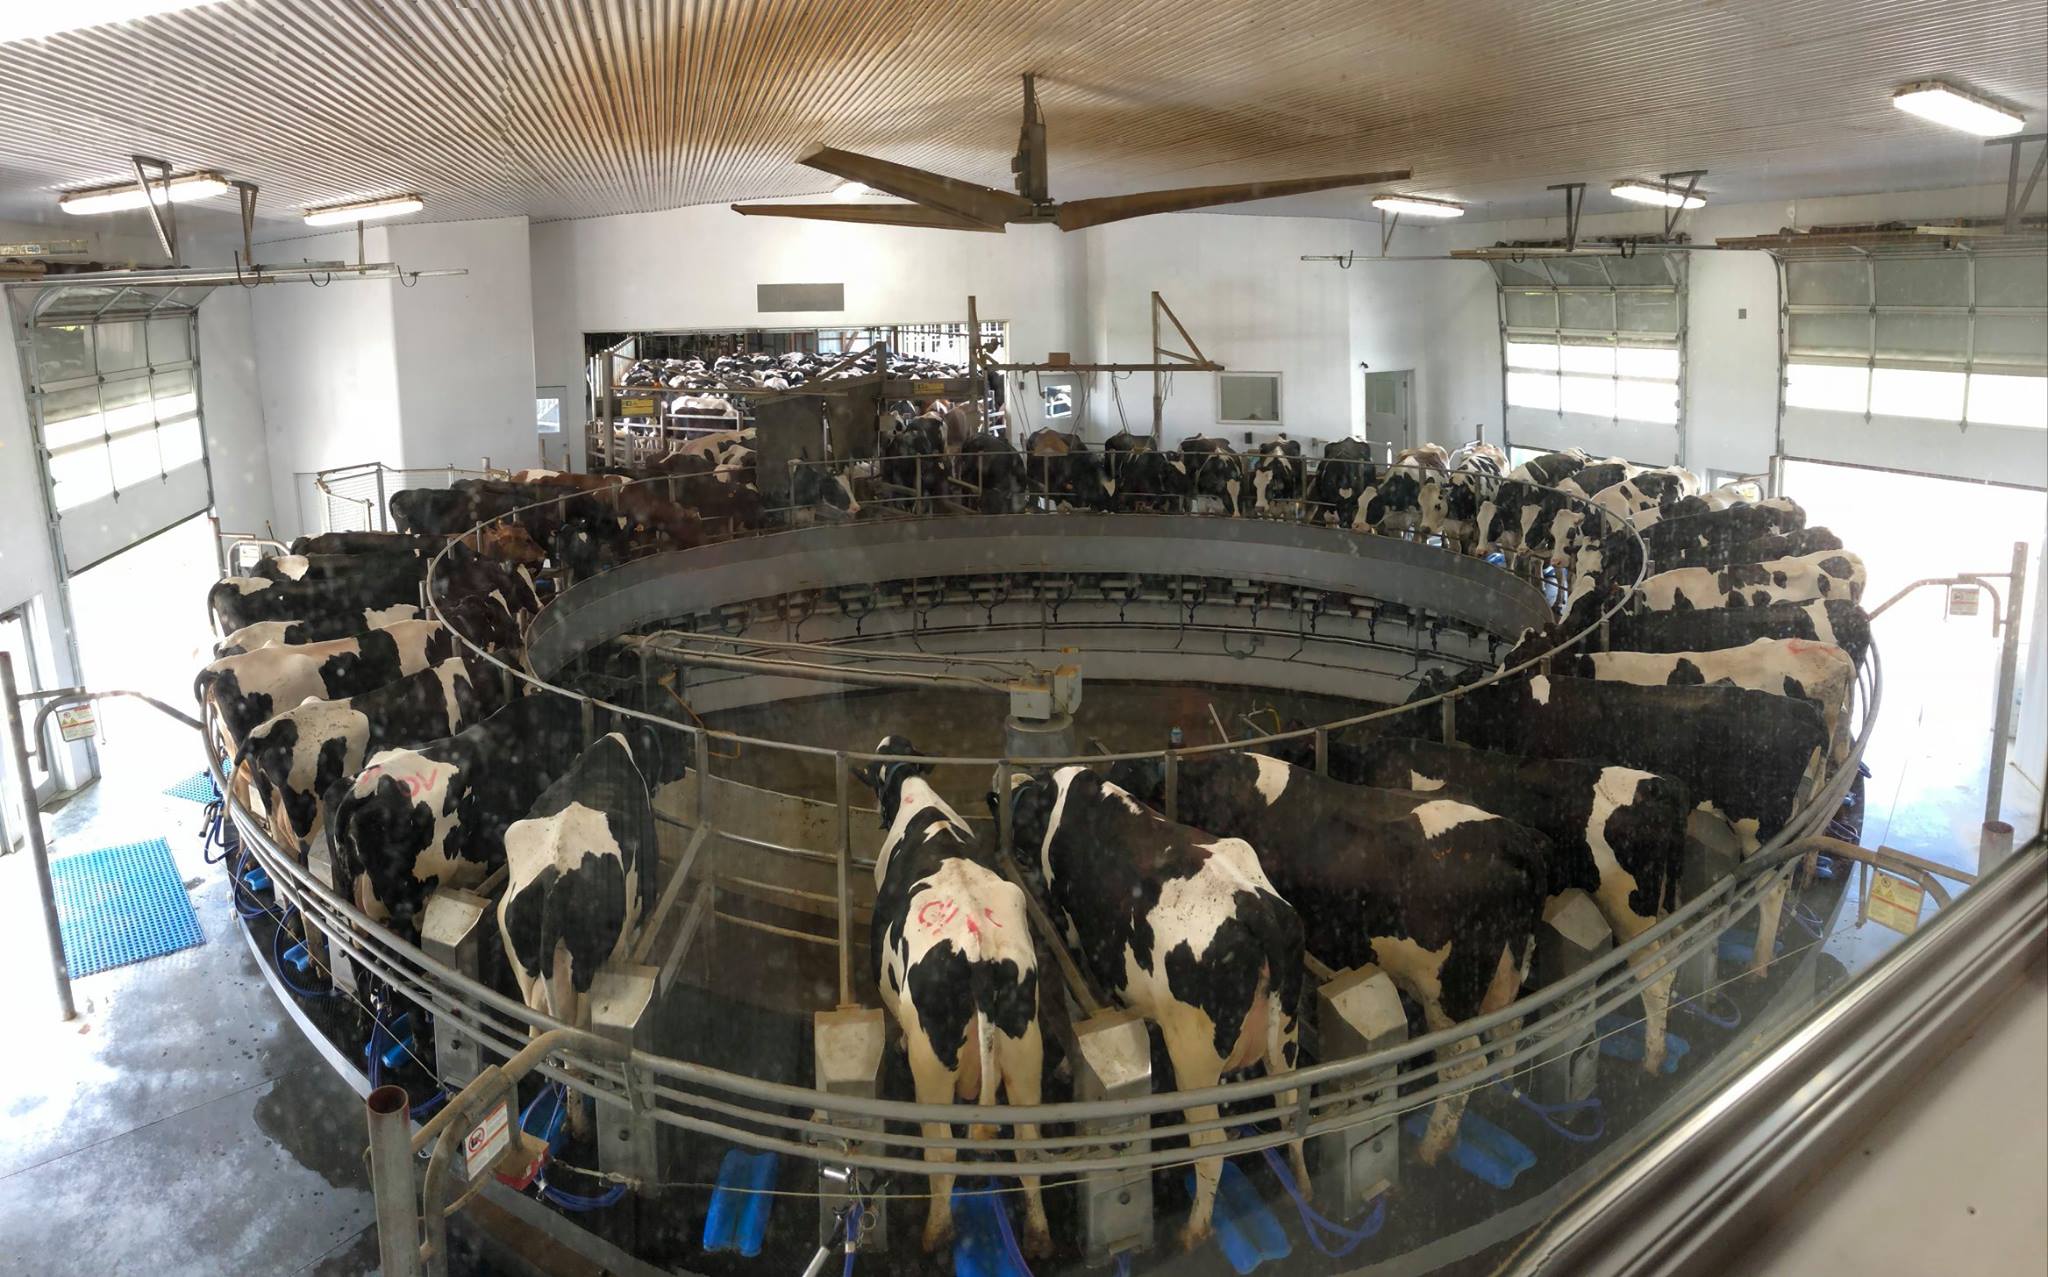 Cows in dairy facility waiting to be milked